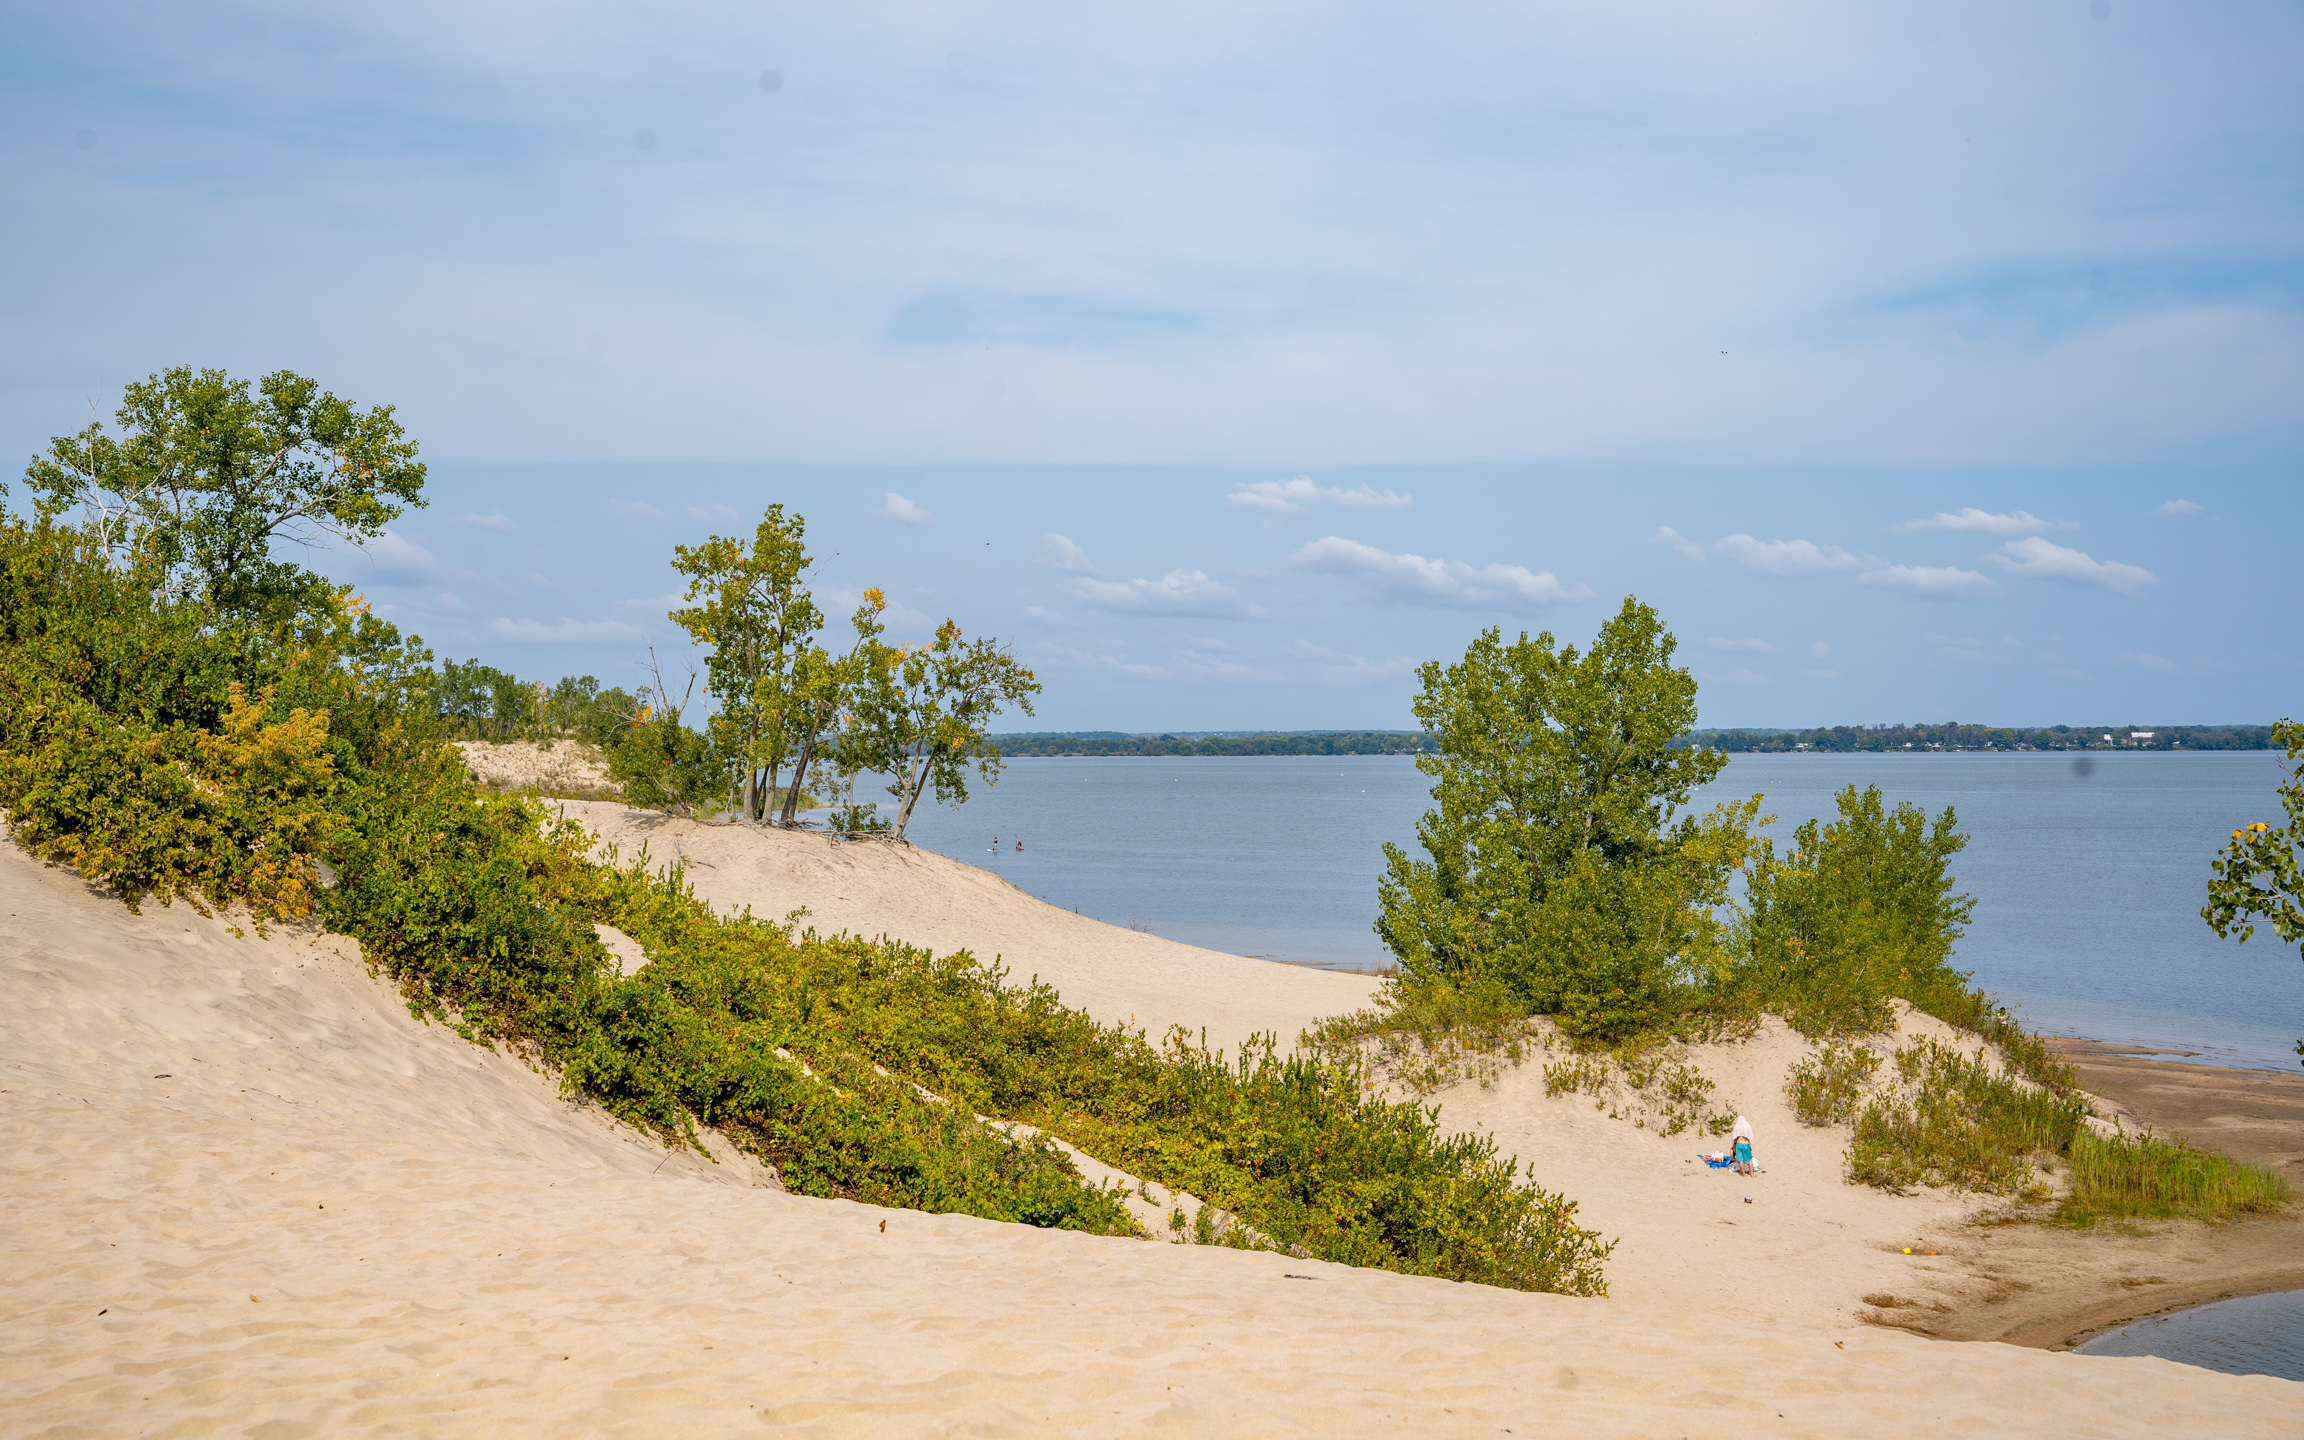 looking down the downs towards the water at sandbanks provinical park